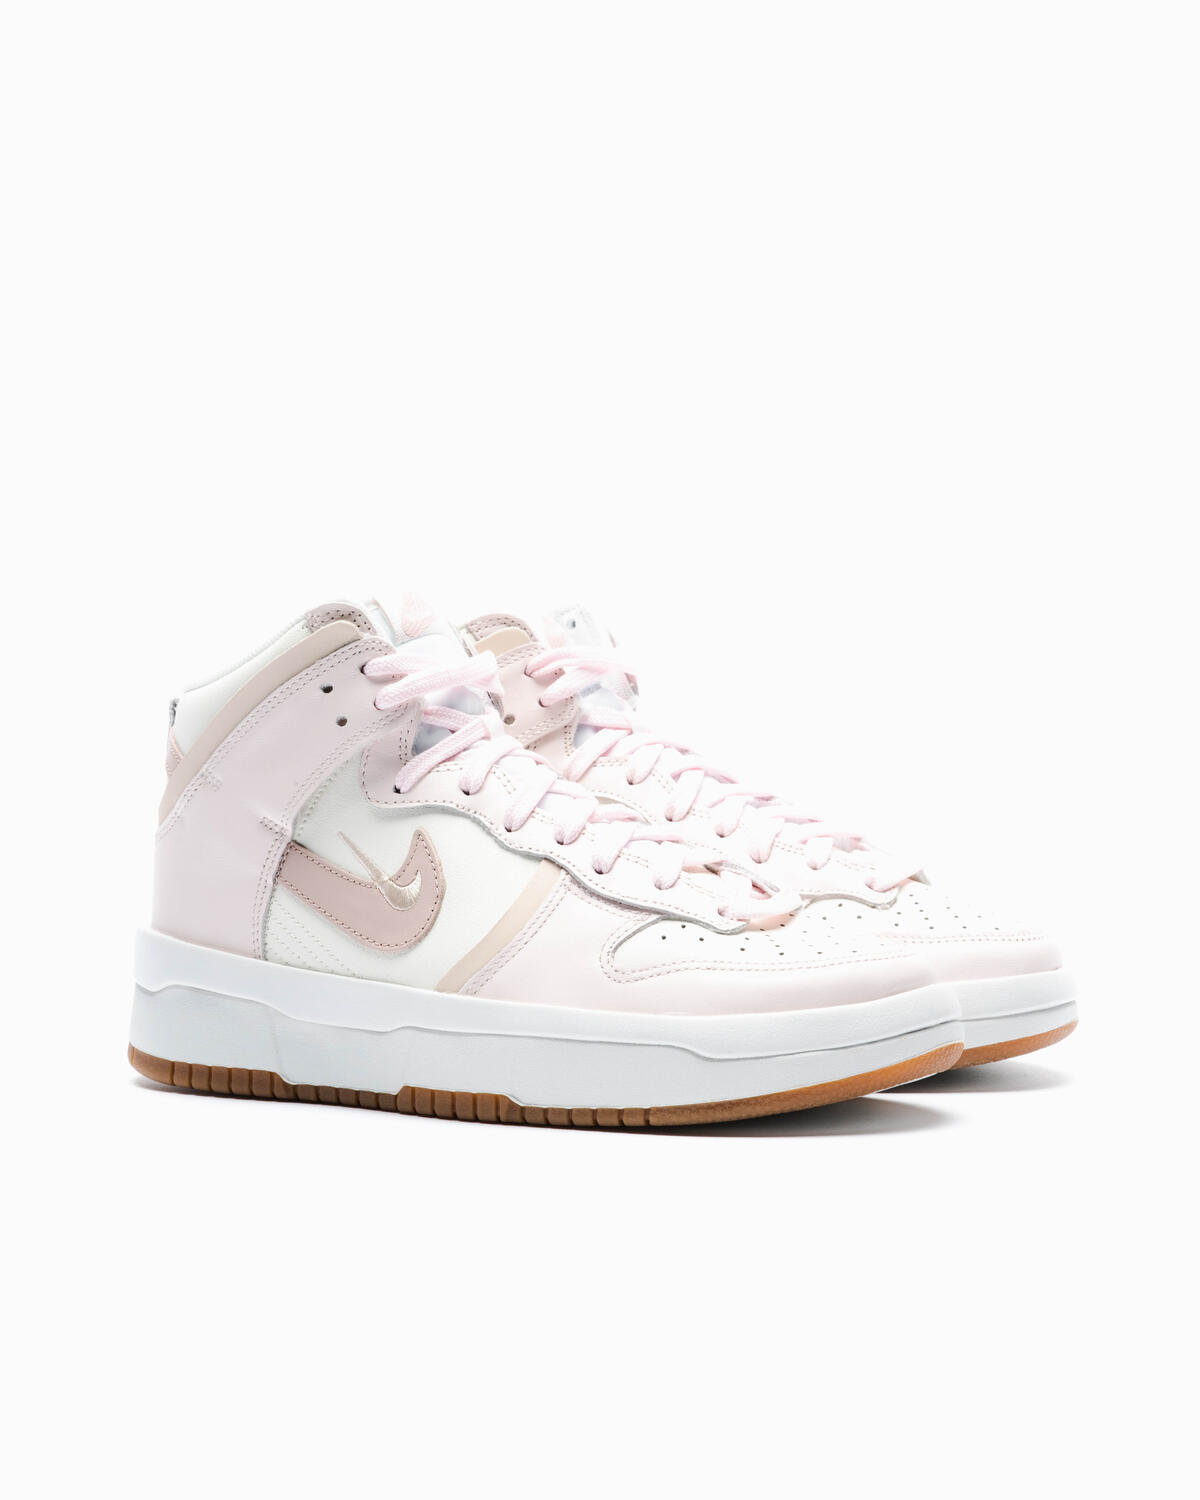 Nike Dunk High Rebel Pink Oxford Womens Lifestyle Shoes Pink Beige Limit  DH3718-102 – Shoe Palace